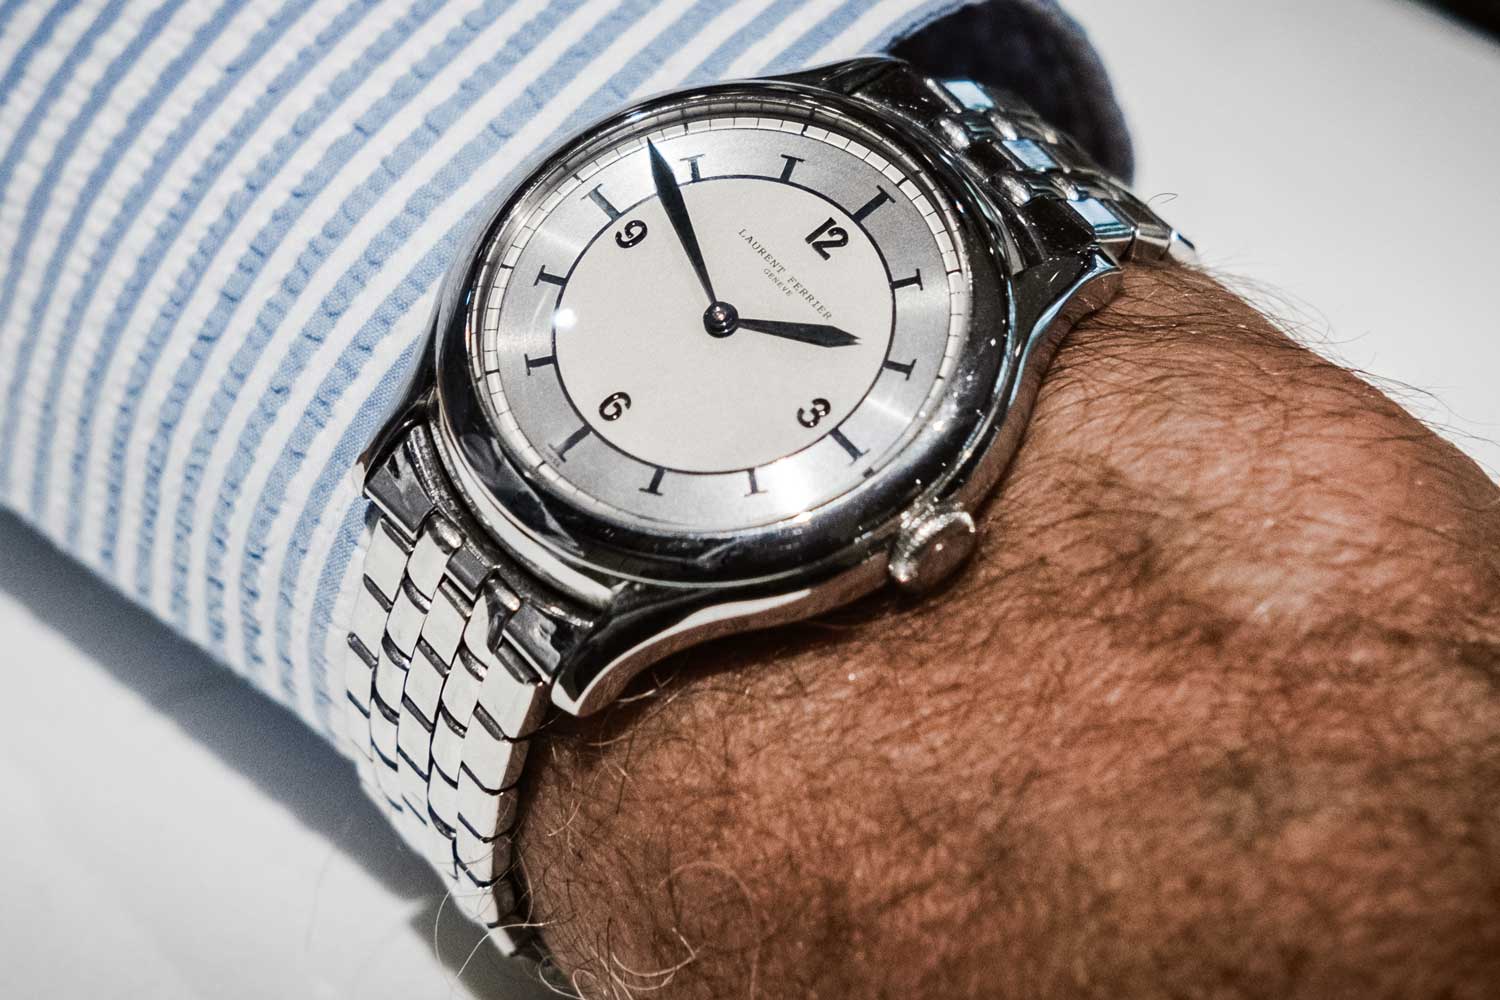 Auro Montanari’s special Laurent Ferrier Micro-Rotor watch on a vintage Gay Frères (©Revolution)